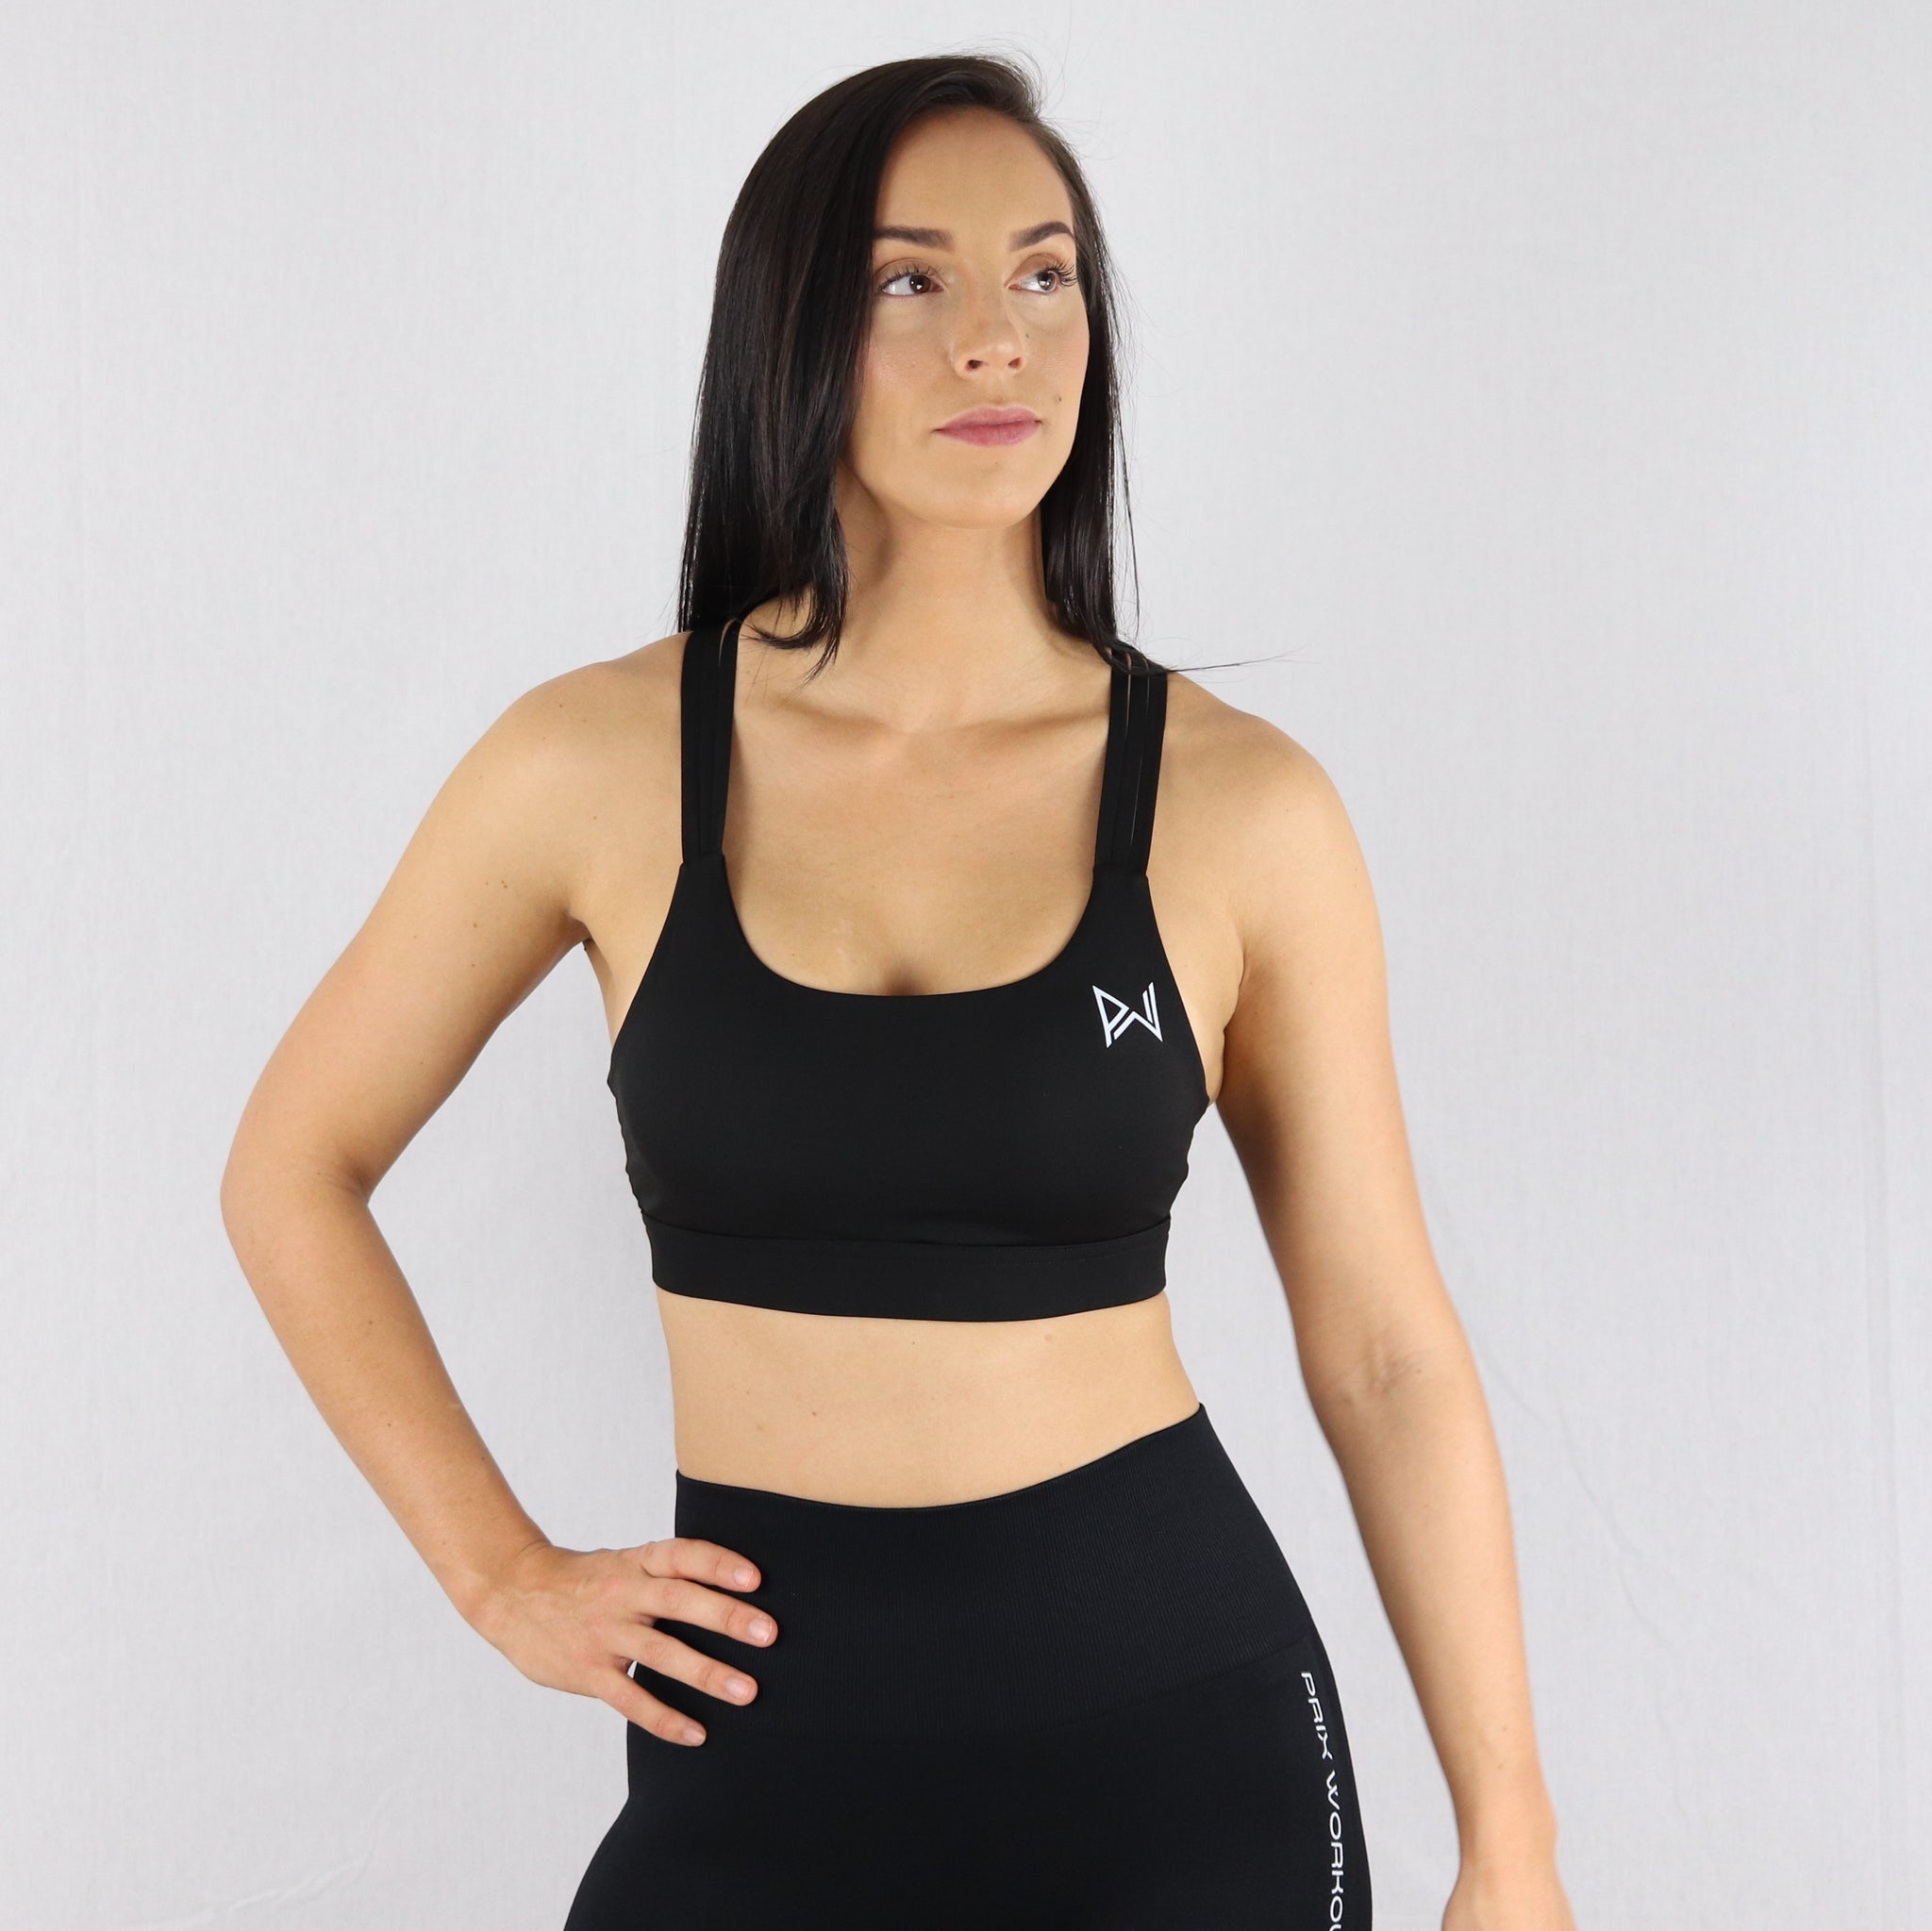 Chestee Sports Bra, Hitting Your First CrossFit Class? Here's What to Wear